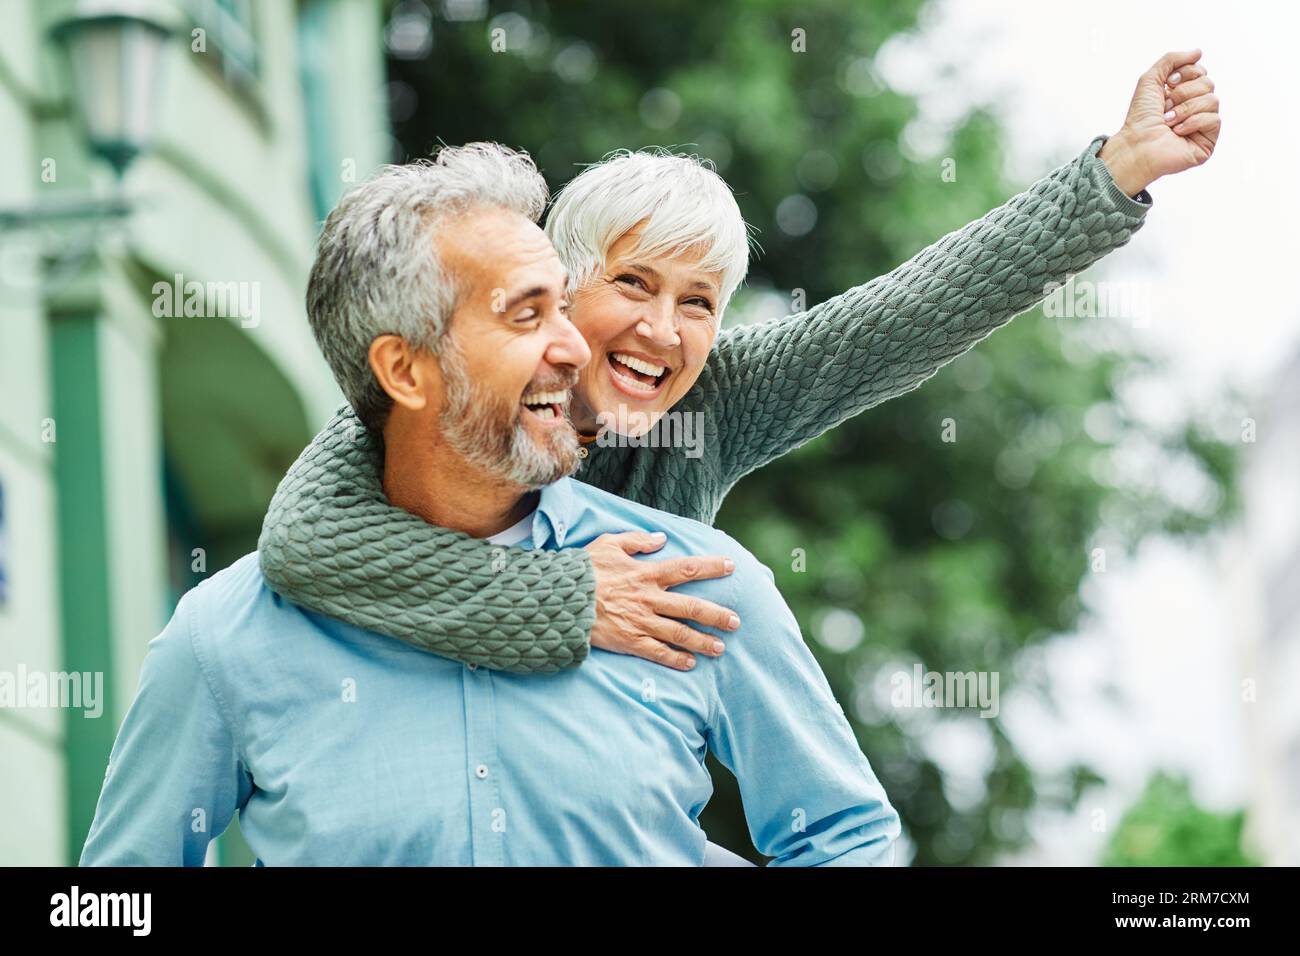 woman man outdoor senior couple happy lifestyle retirement together smiling love piggyback active mature Stock Photo